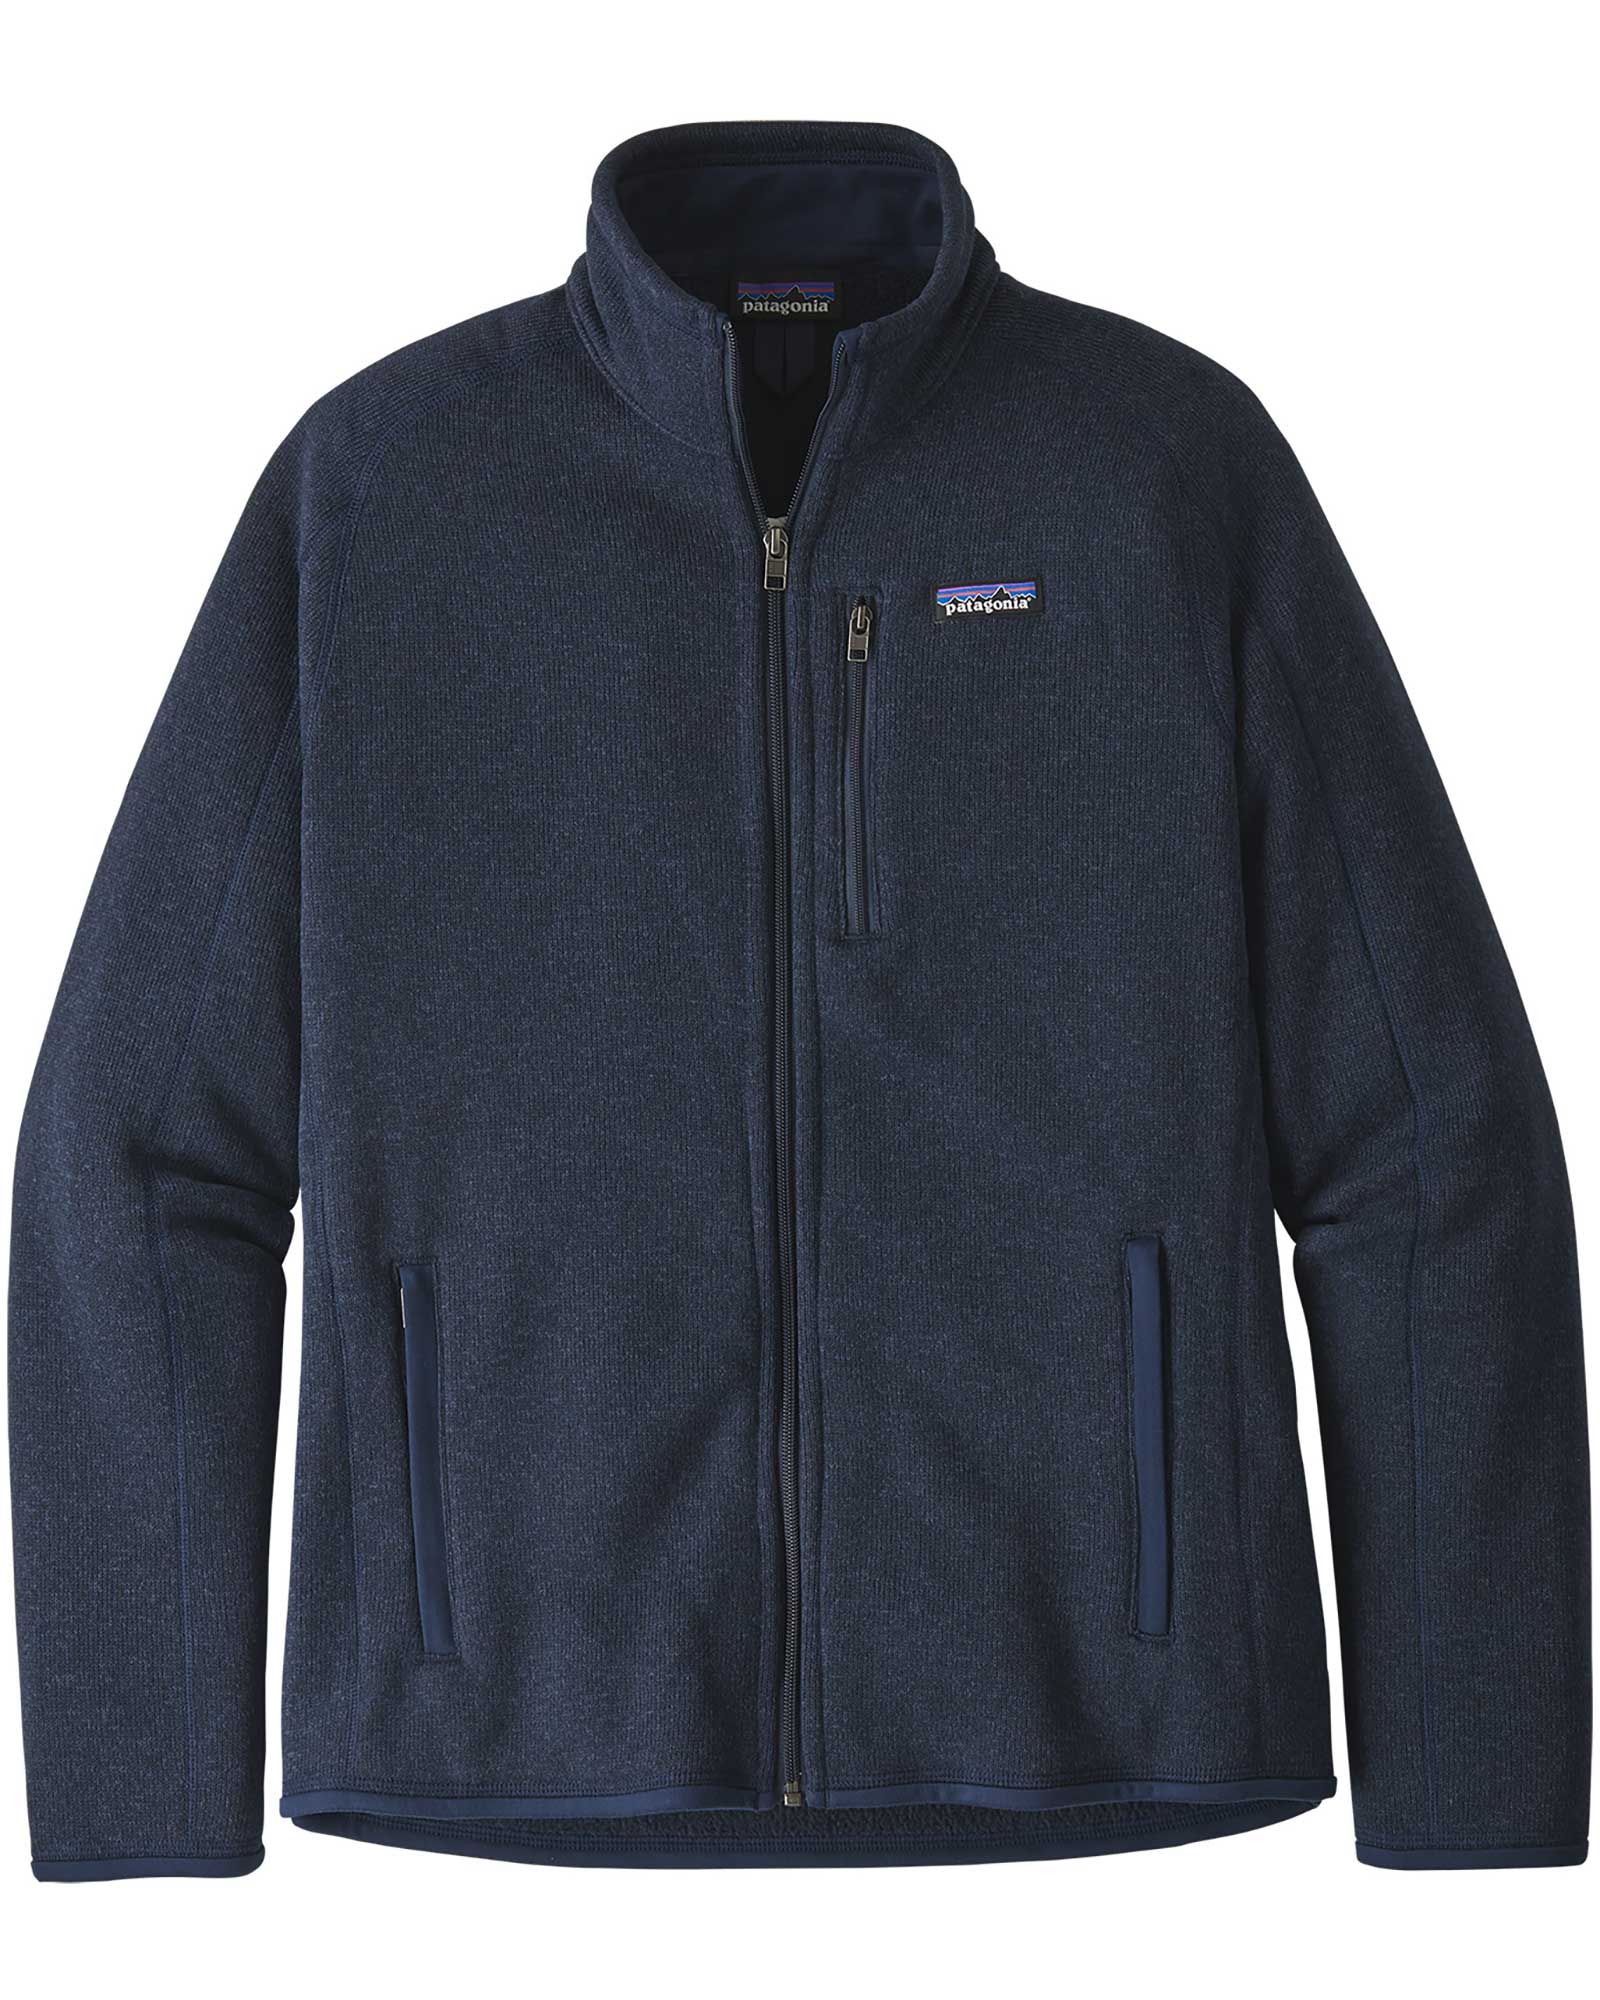 Patagonia Better Sweater Men’s Jacket - New Navy S